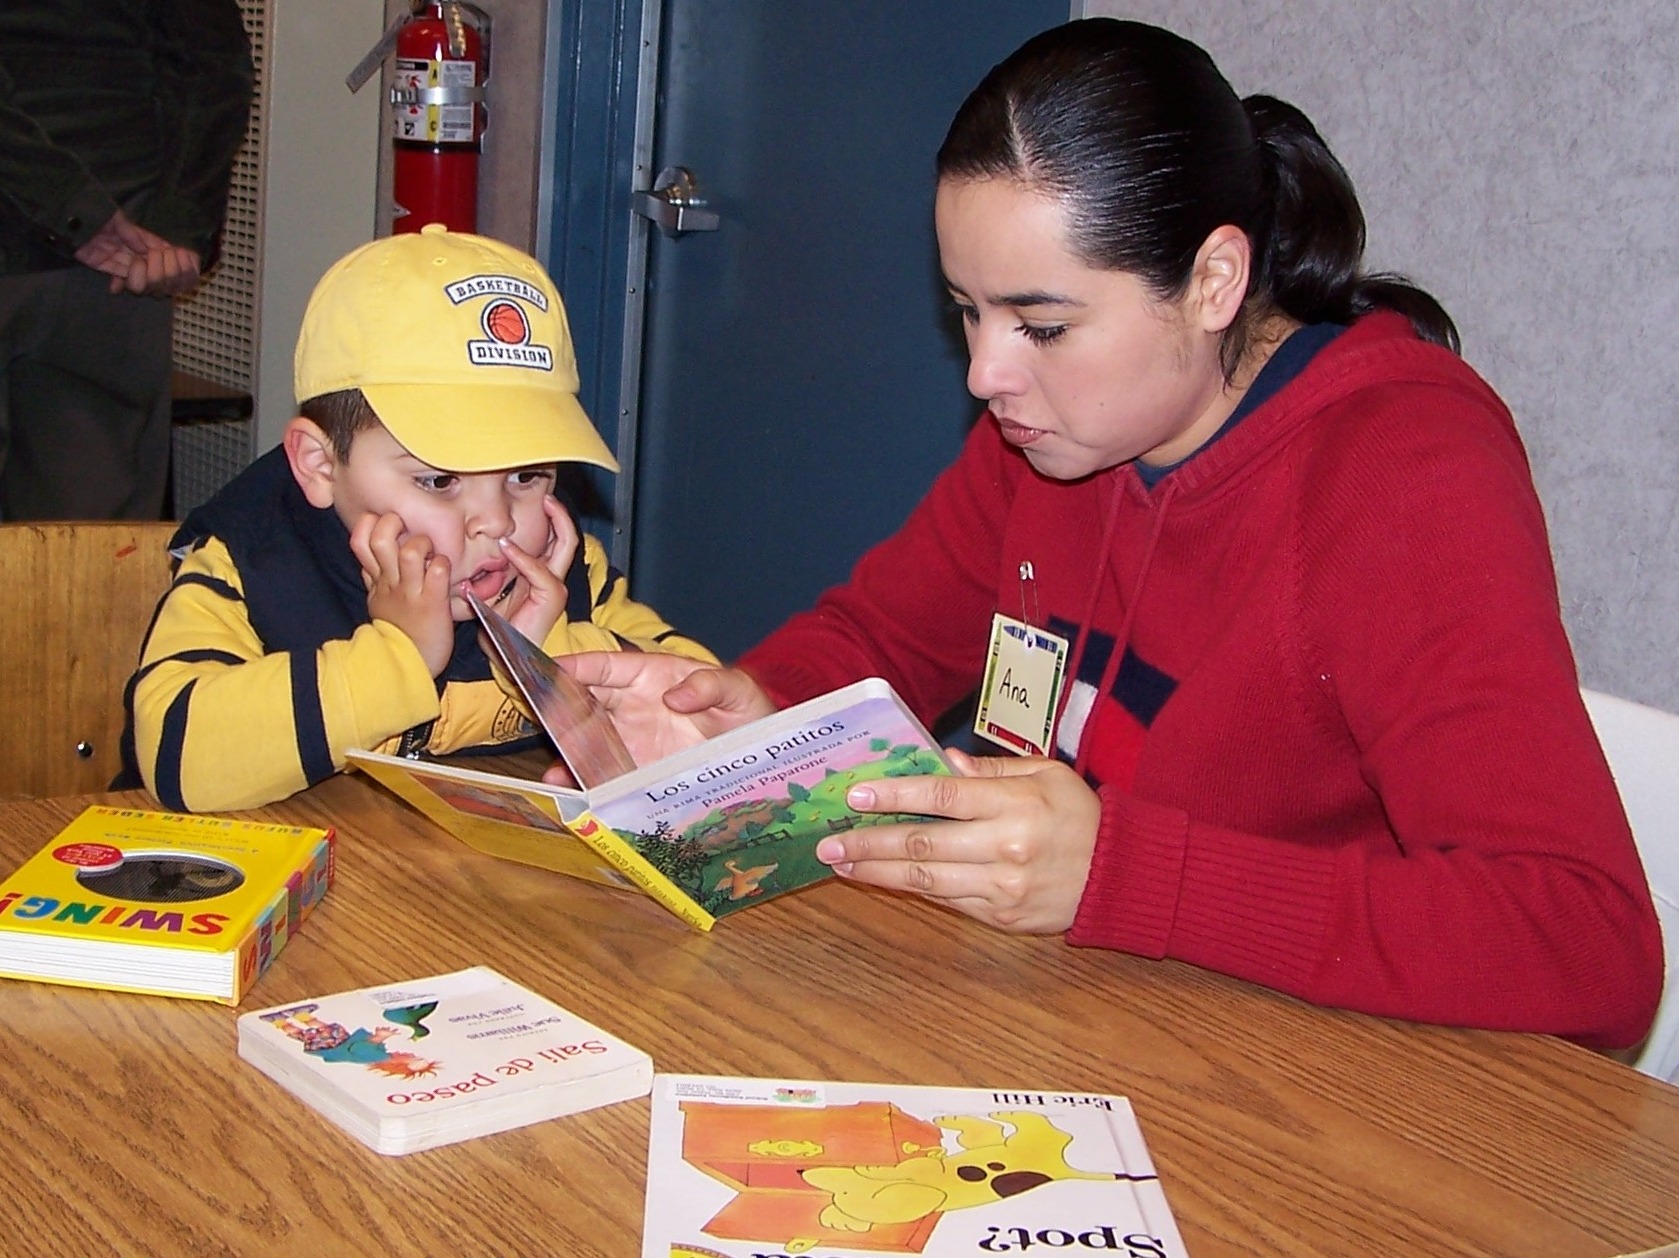 Early Childhood Education: Pasitos